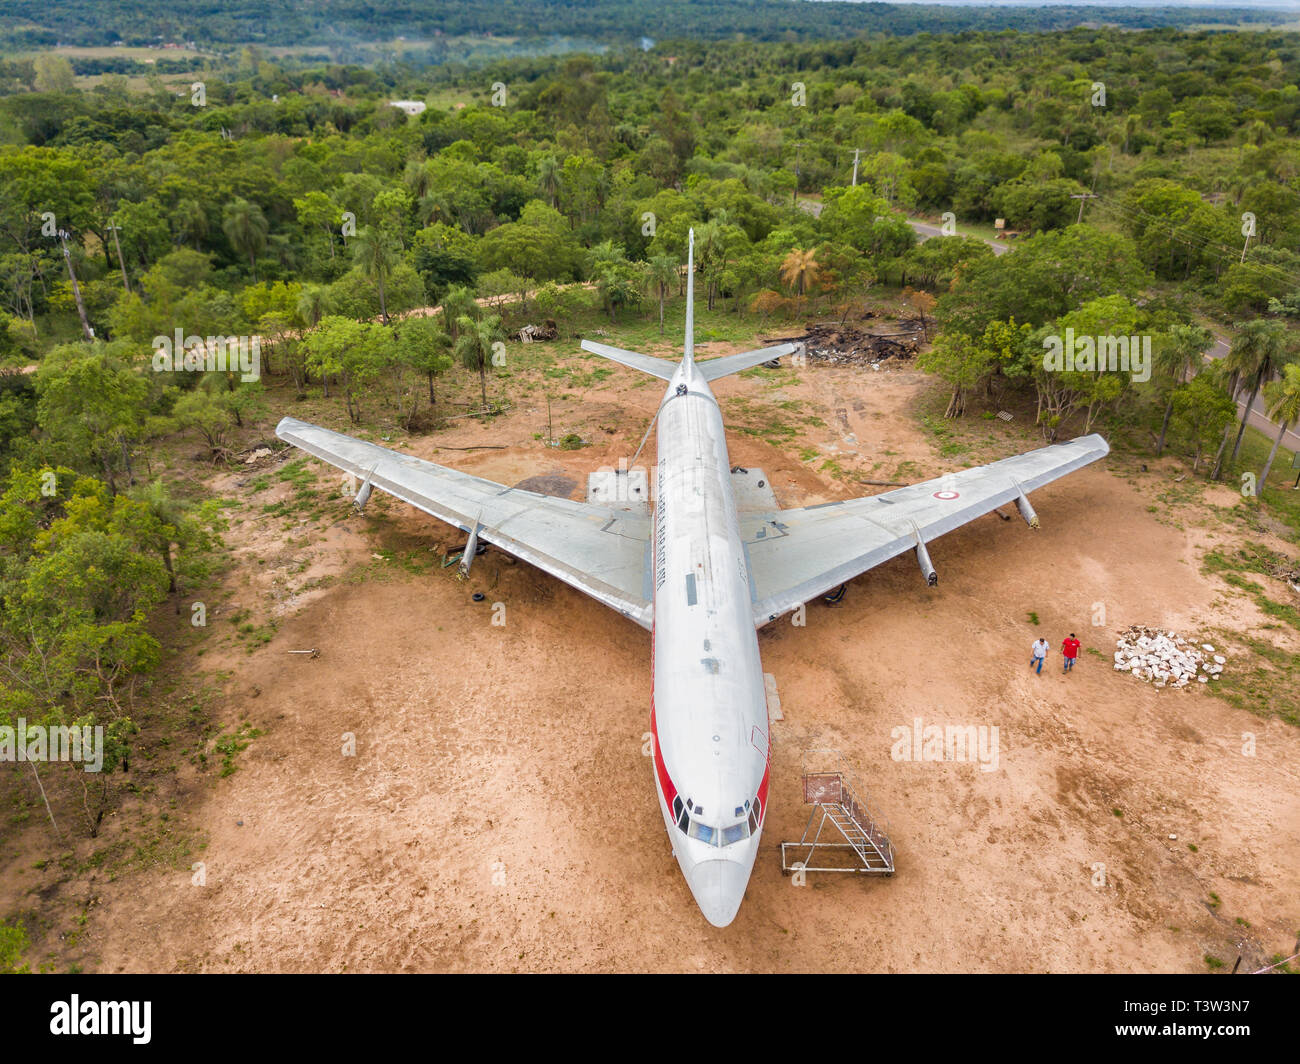 Loma Grande, Paraguay - November 07, 2017: Aerial view of a discarded airplane on a private lot. The plots around the plane are for sale. Stock Photo